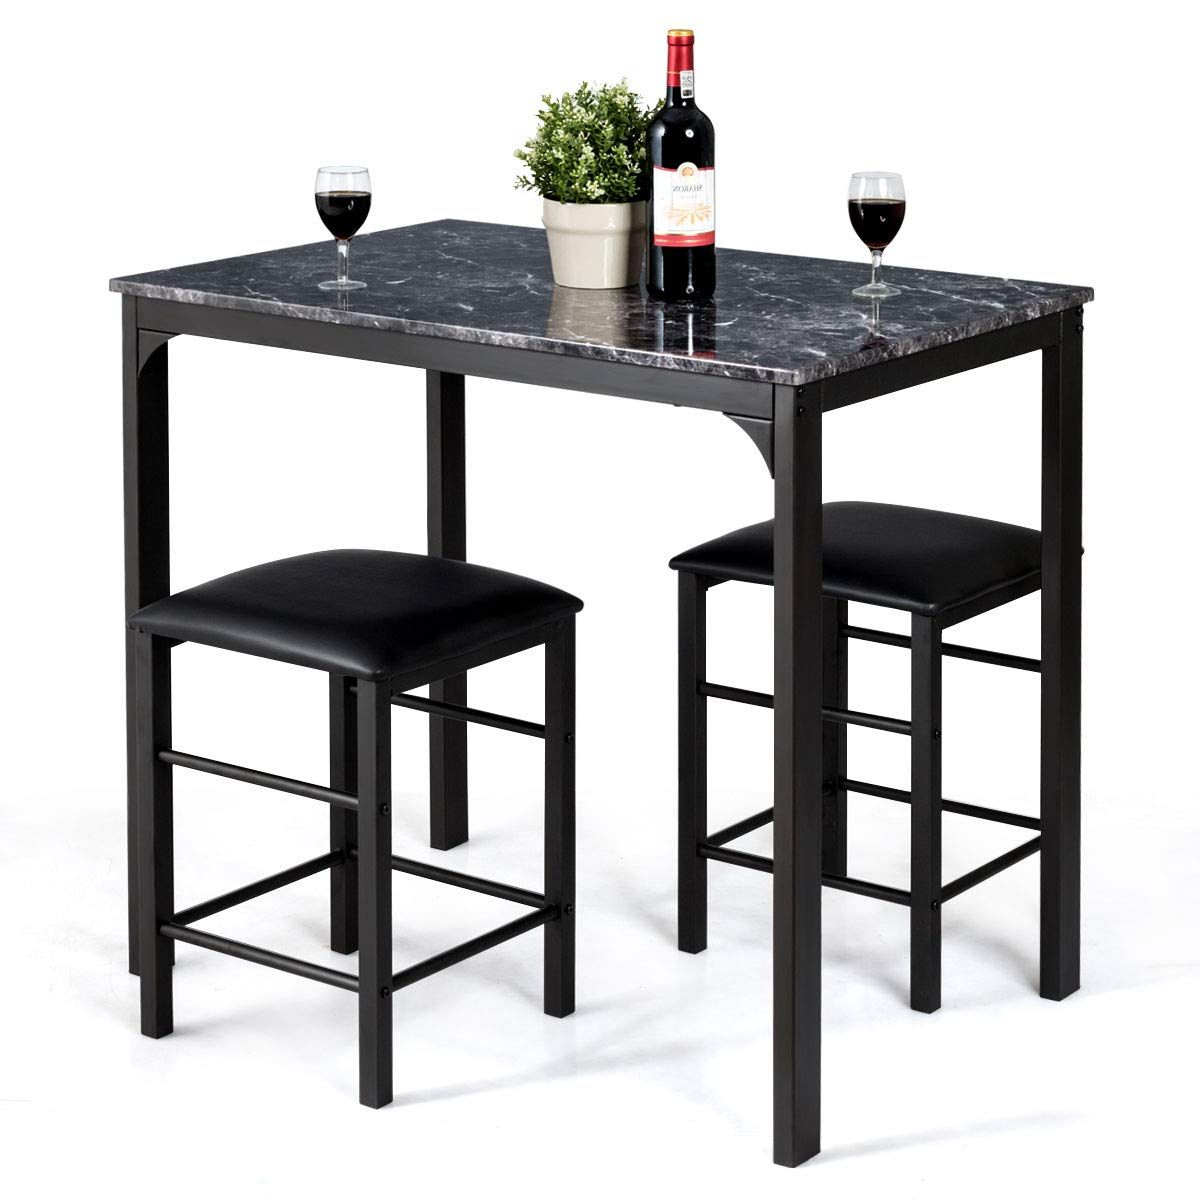 2019 Giantex 3 Pcs Dining Table And Chairs Set With Faux Marble Tabletop 2  Chairs Contemporary Dining Table Set For Home Or Hotel Dining Room, Kitchen  Or Inside 3 Pieces Dining Tables And Chair Set (View 3 of 25)